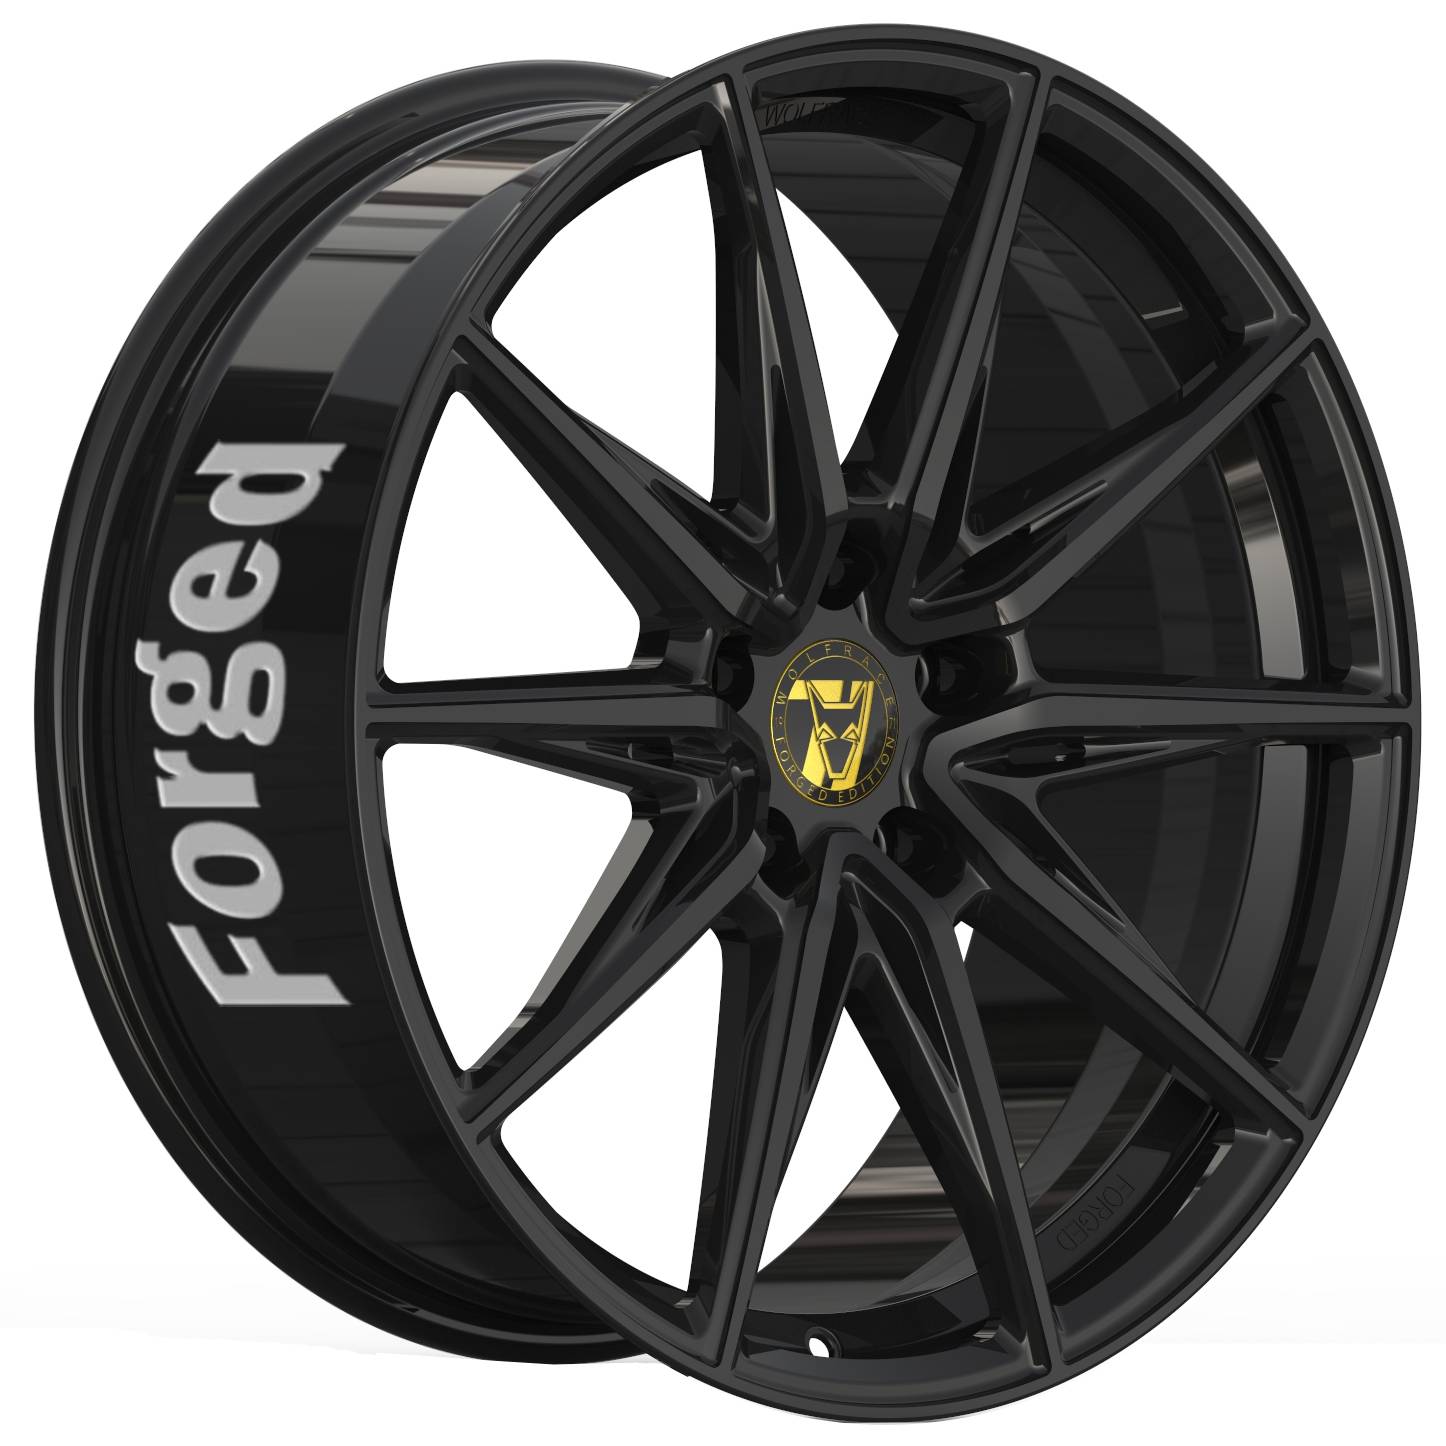 Demon Wheels 71 Forged Edition Urban Racer Forged [10x23] -5x115- ET 35